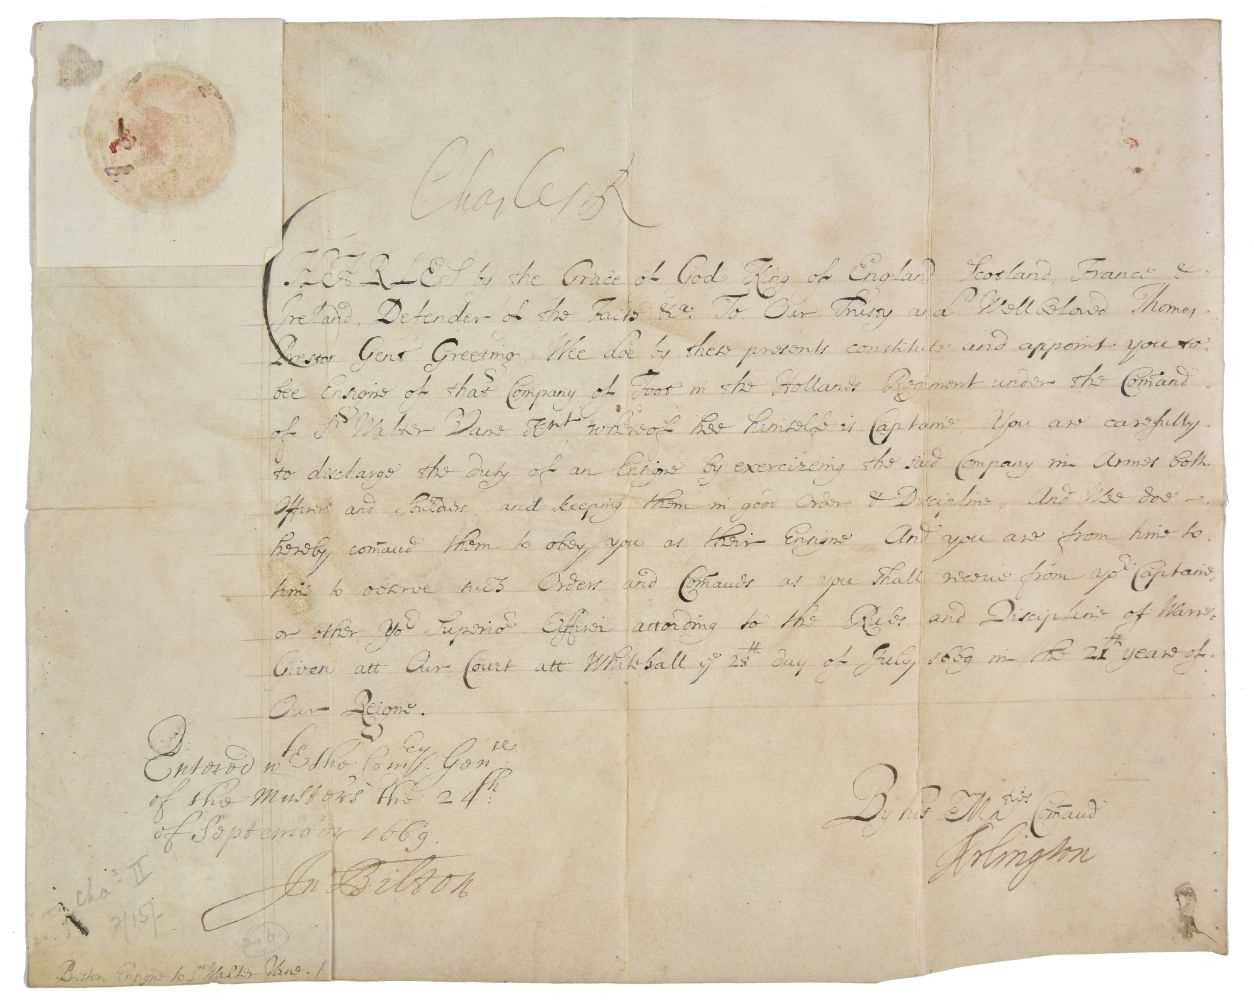 Lot 227 - Charles II (1630-1685, King of England). Document signed, 'Charles R', 28 July 1669